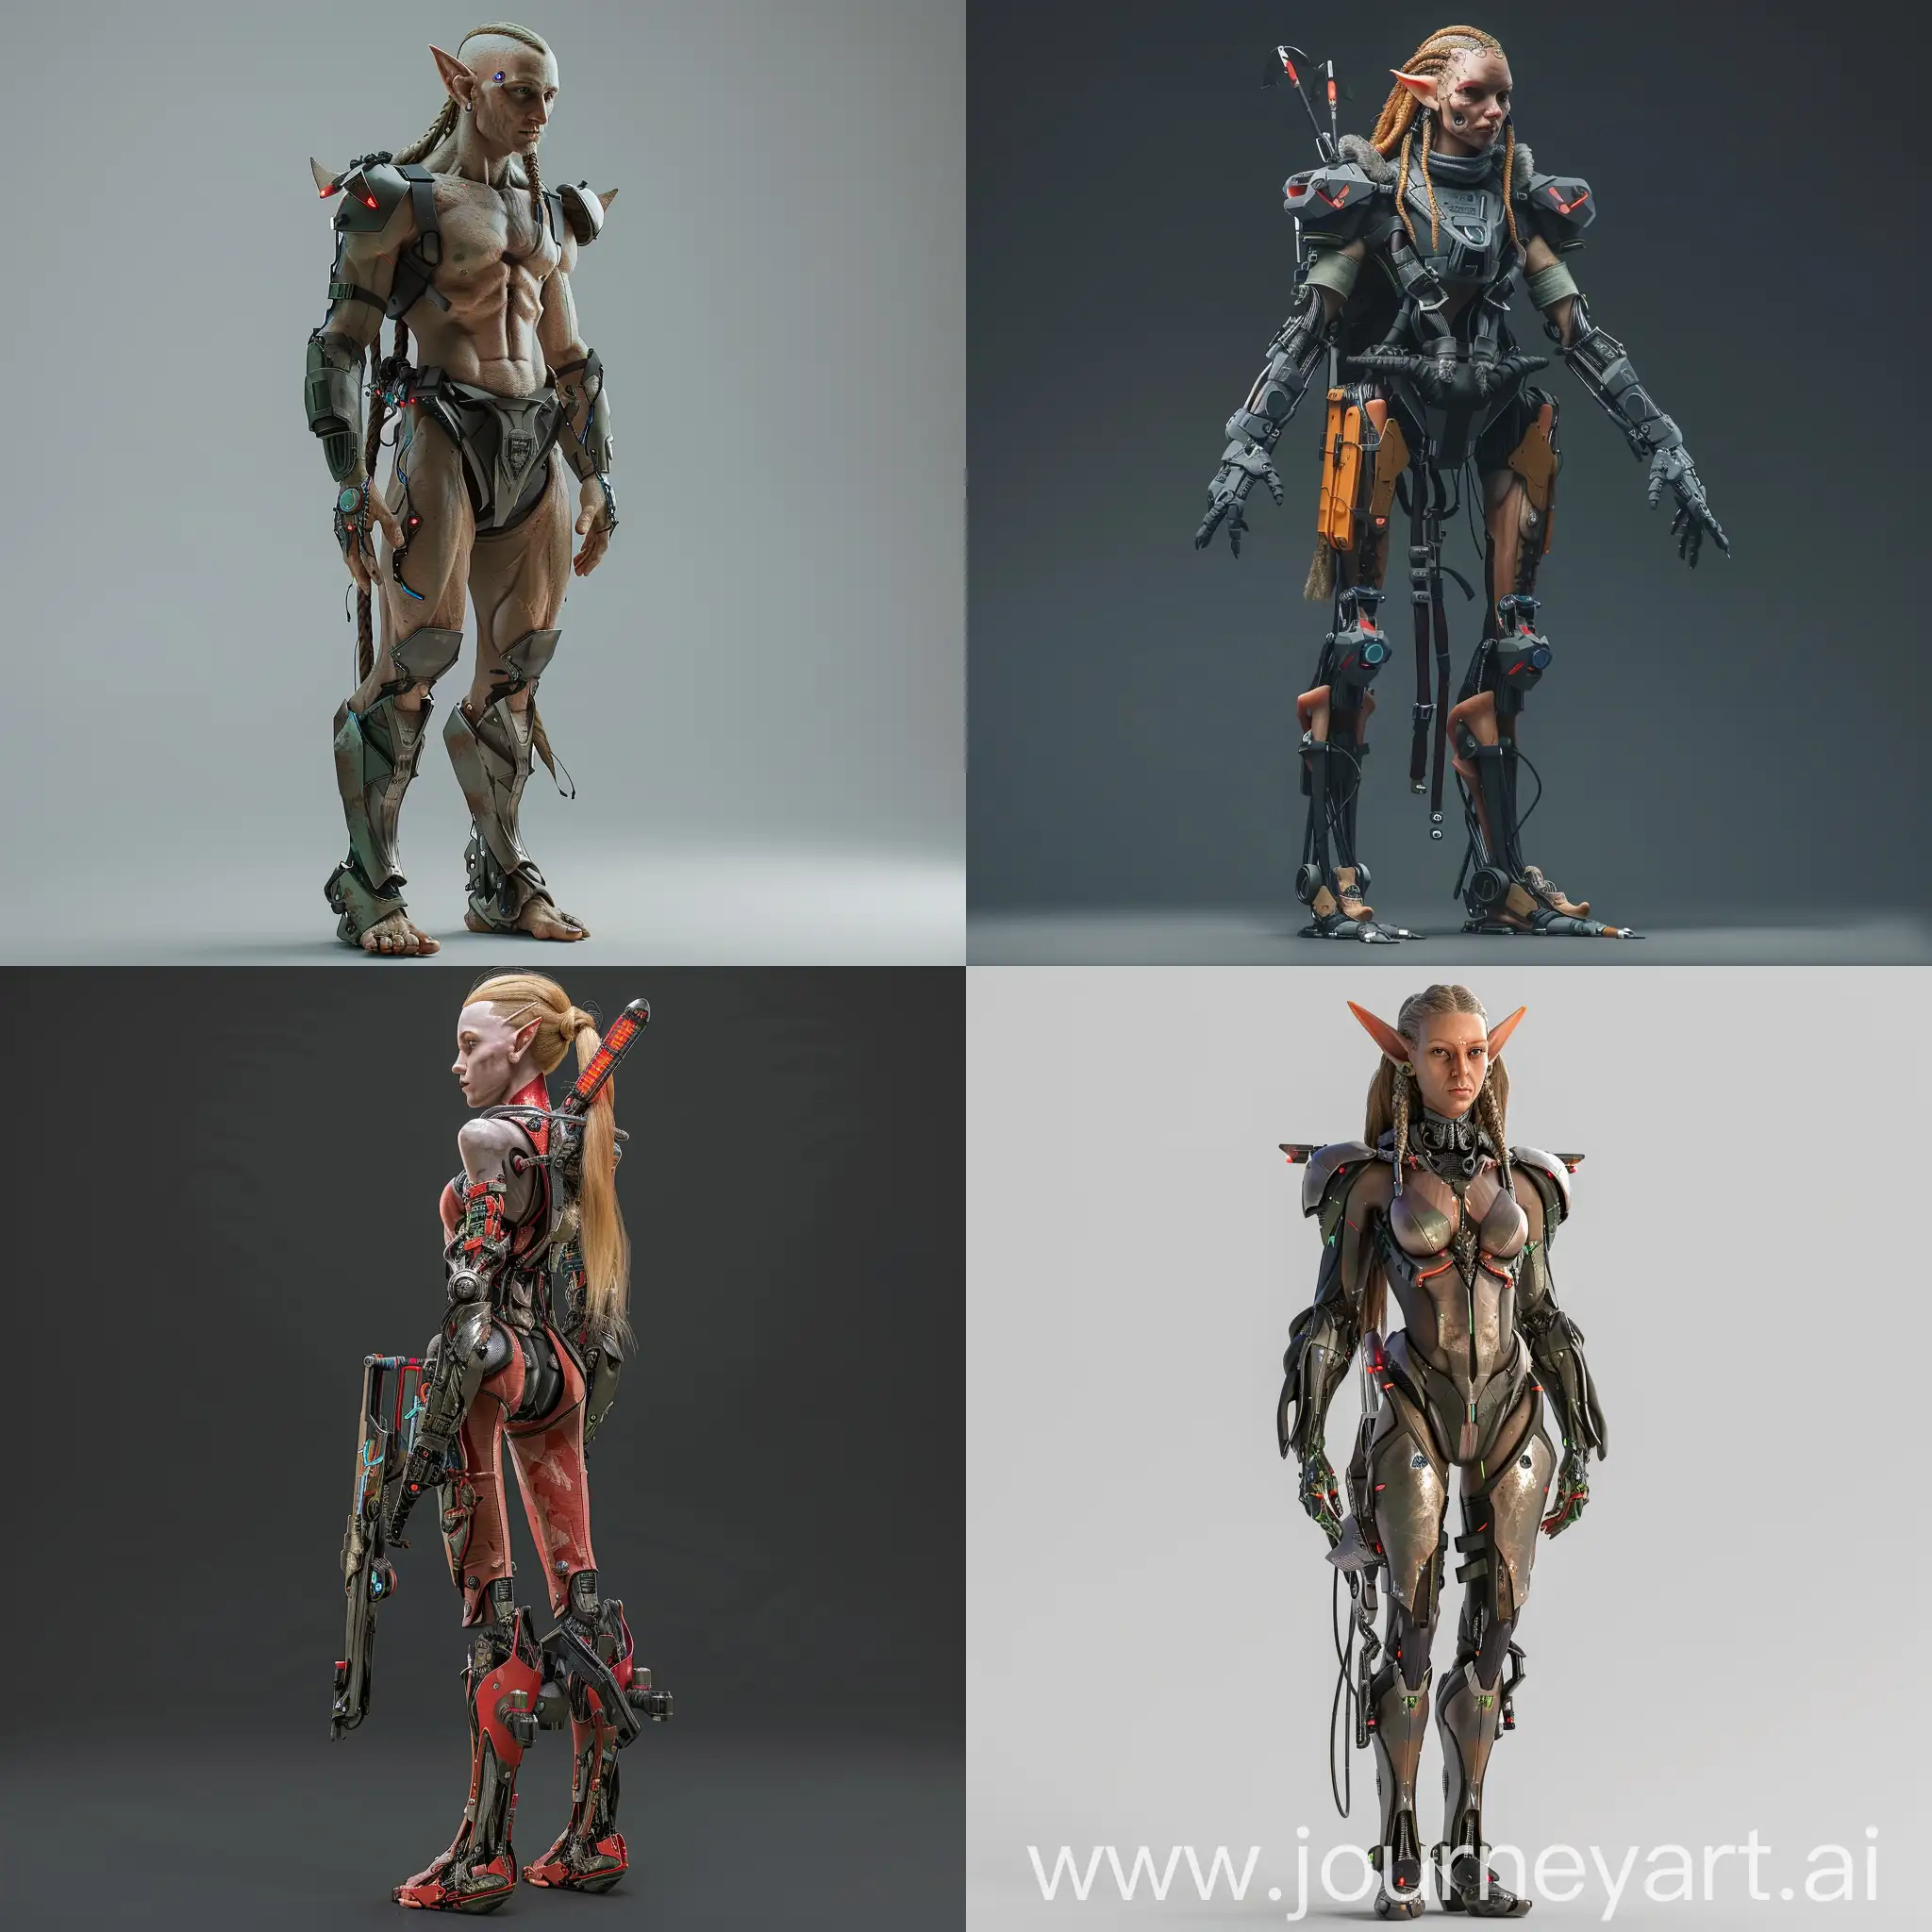 Cyberpunk-Elf-Warrior-with-Realistic-Features